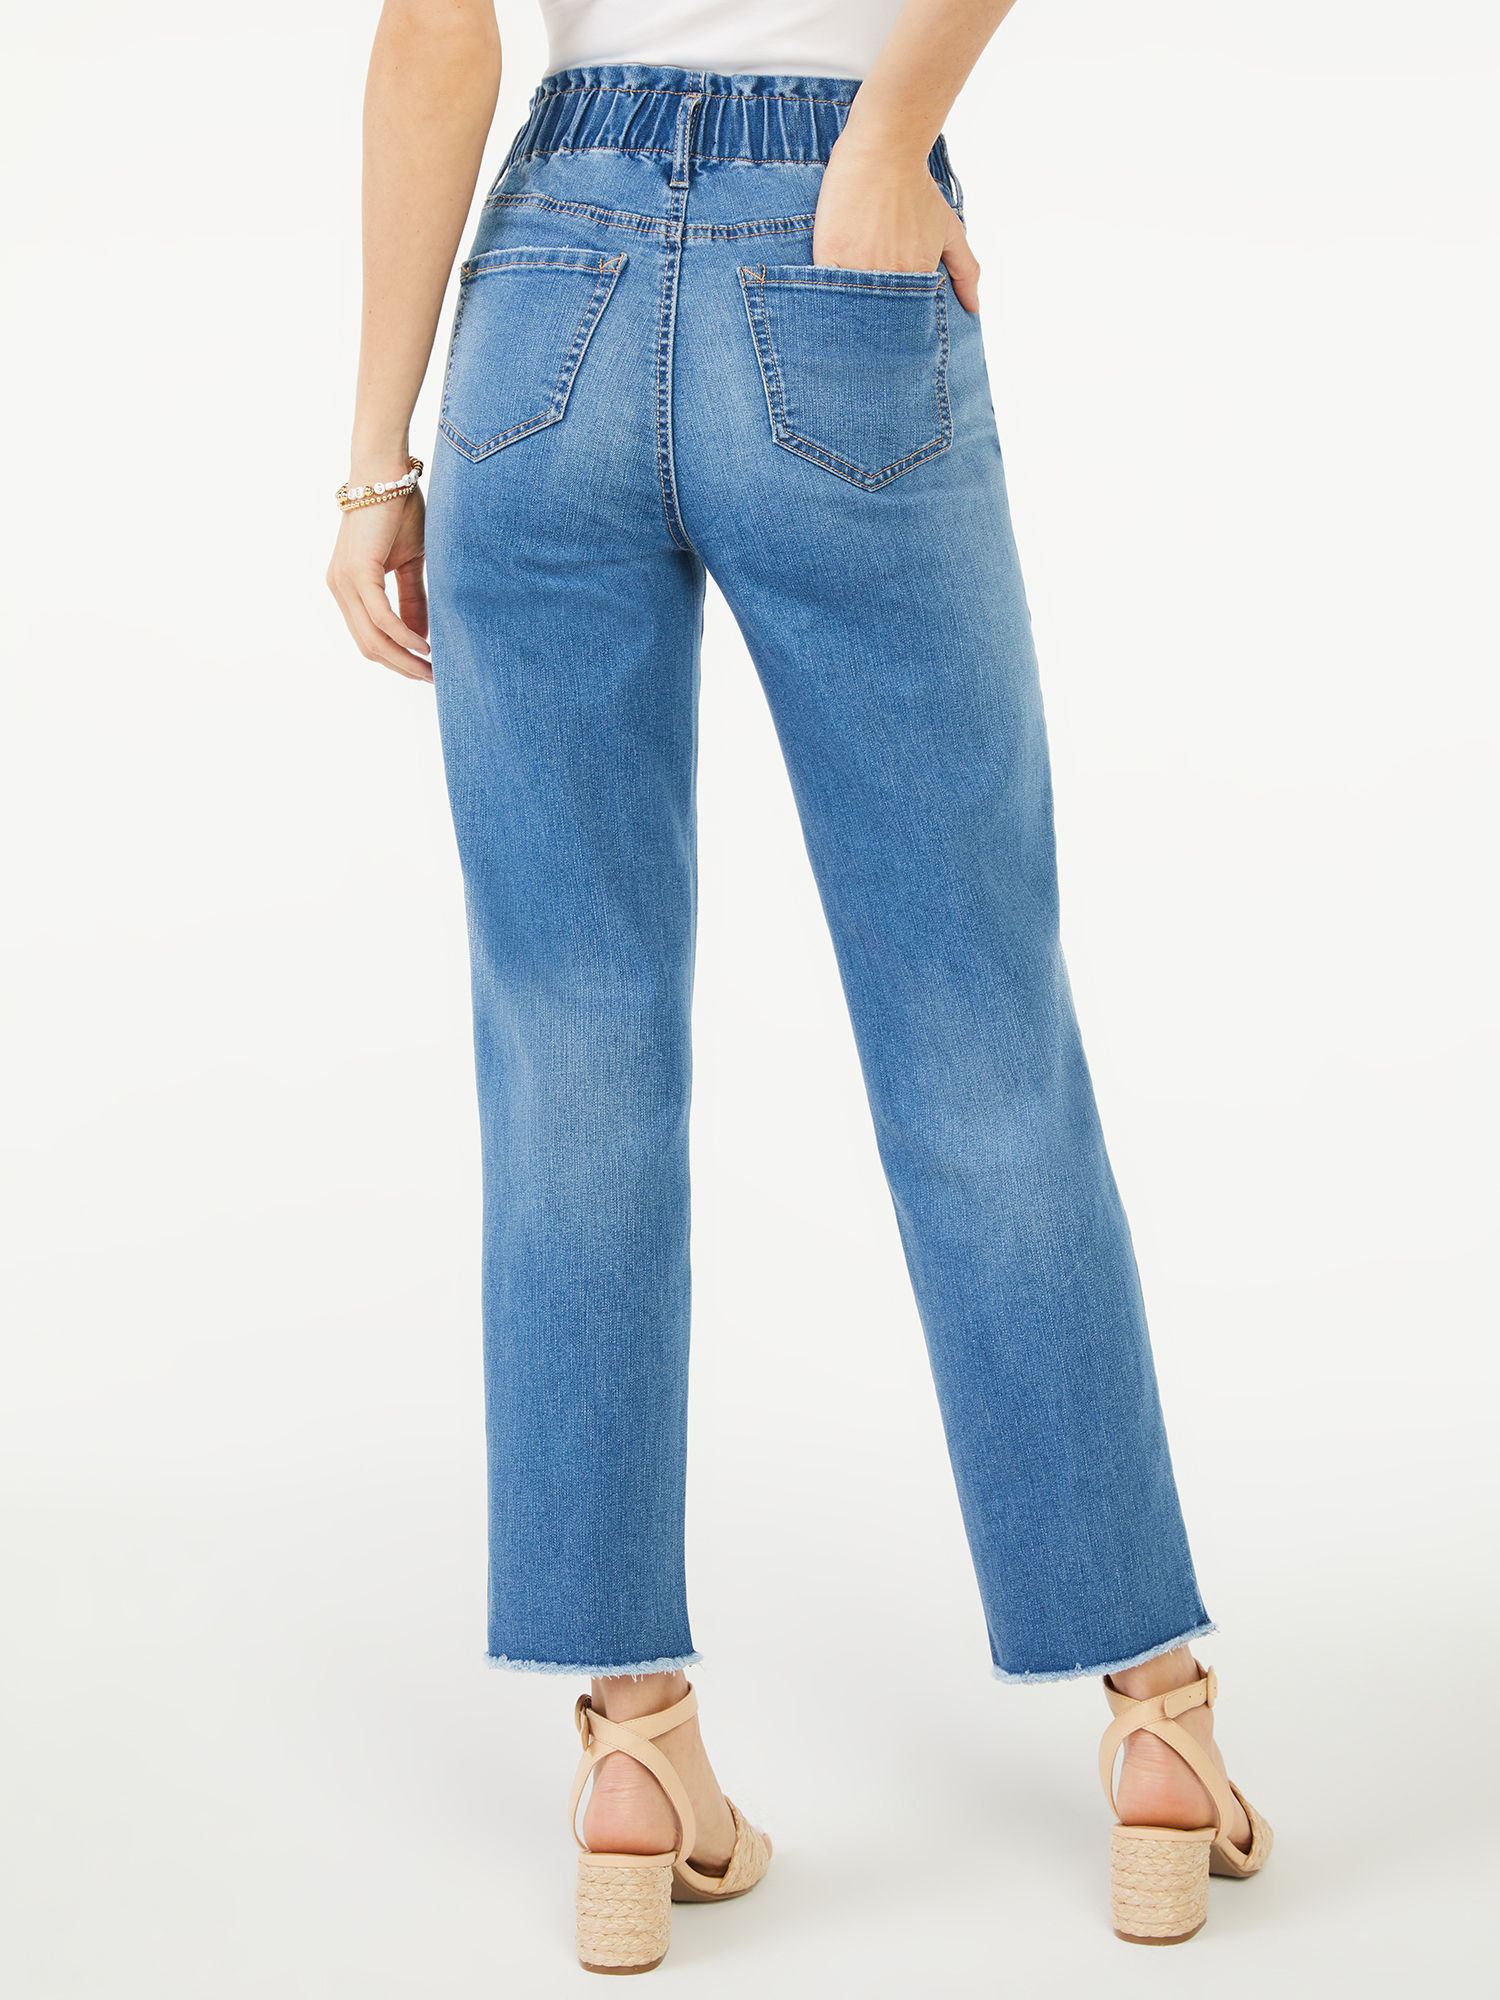 Scoop Women's High-Rise Straight Crop Jeans - image 3 of 6